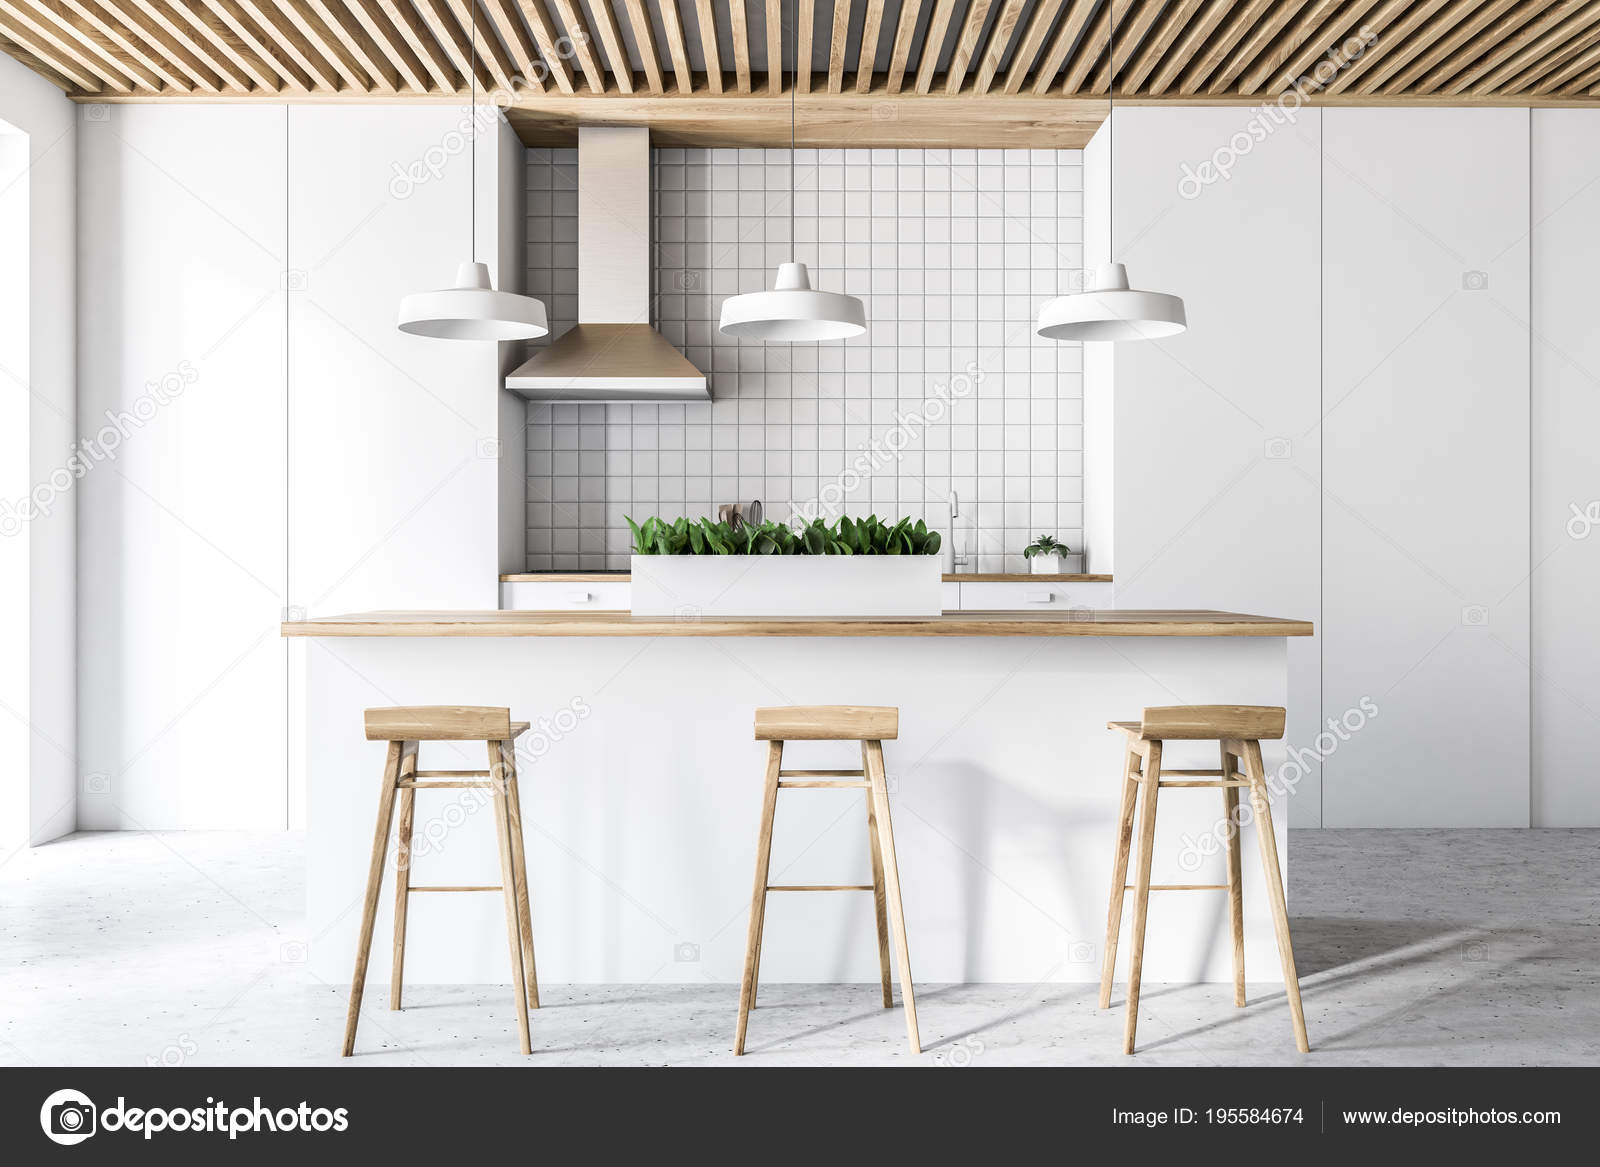 White and beige kitchen interior with bar Stock Photo by